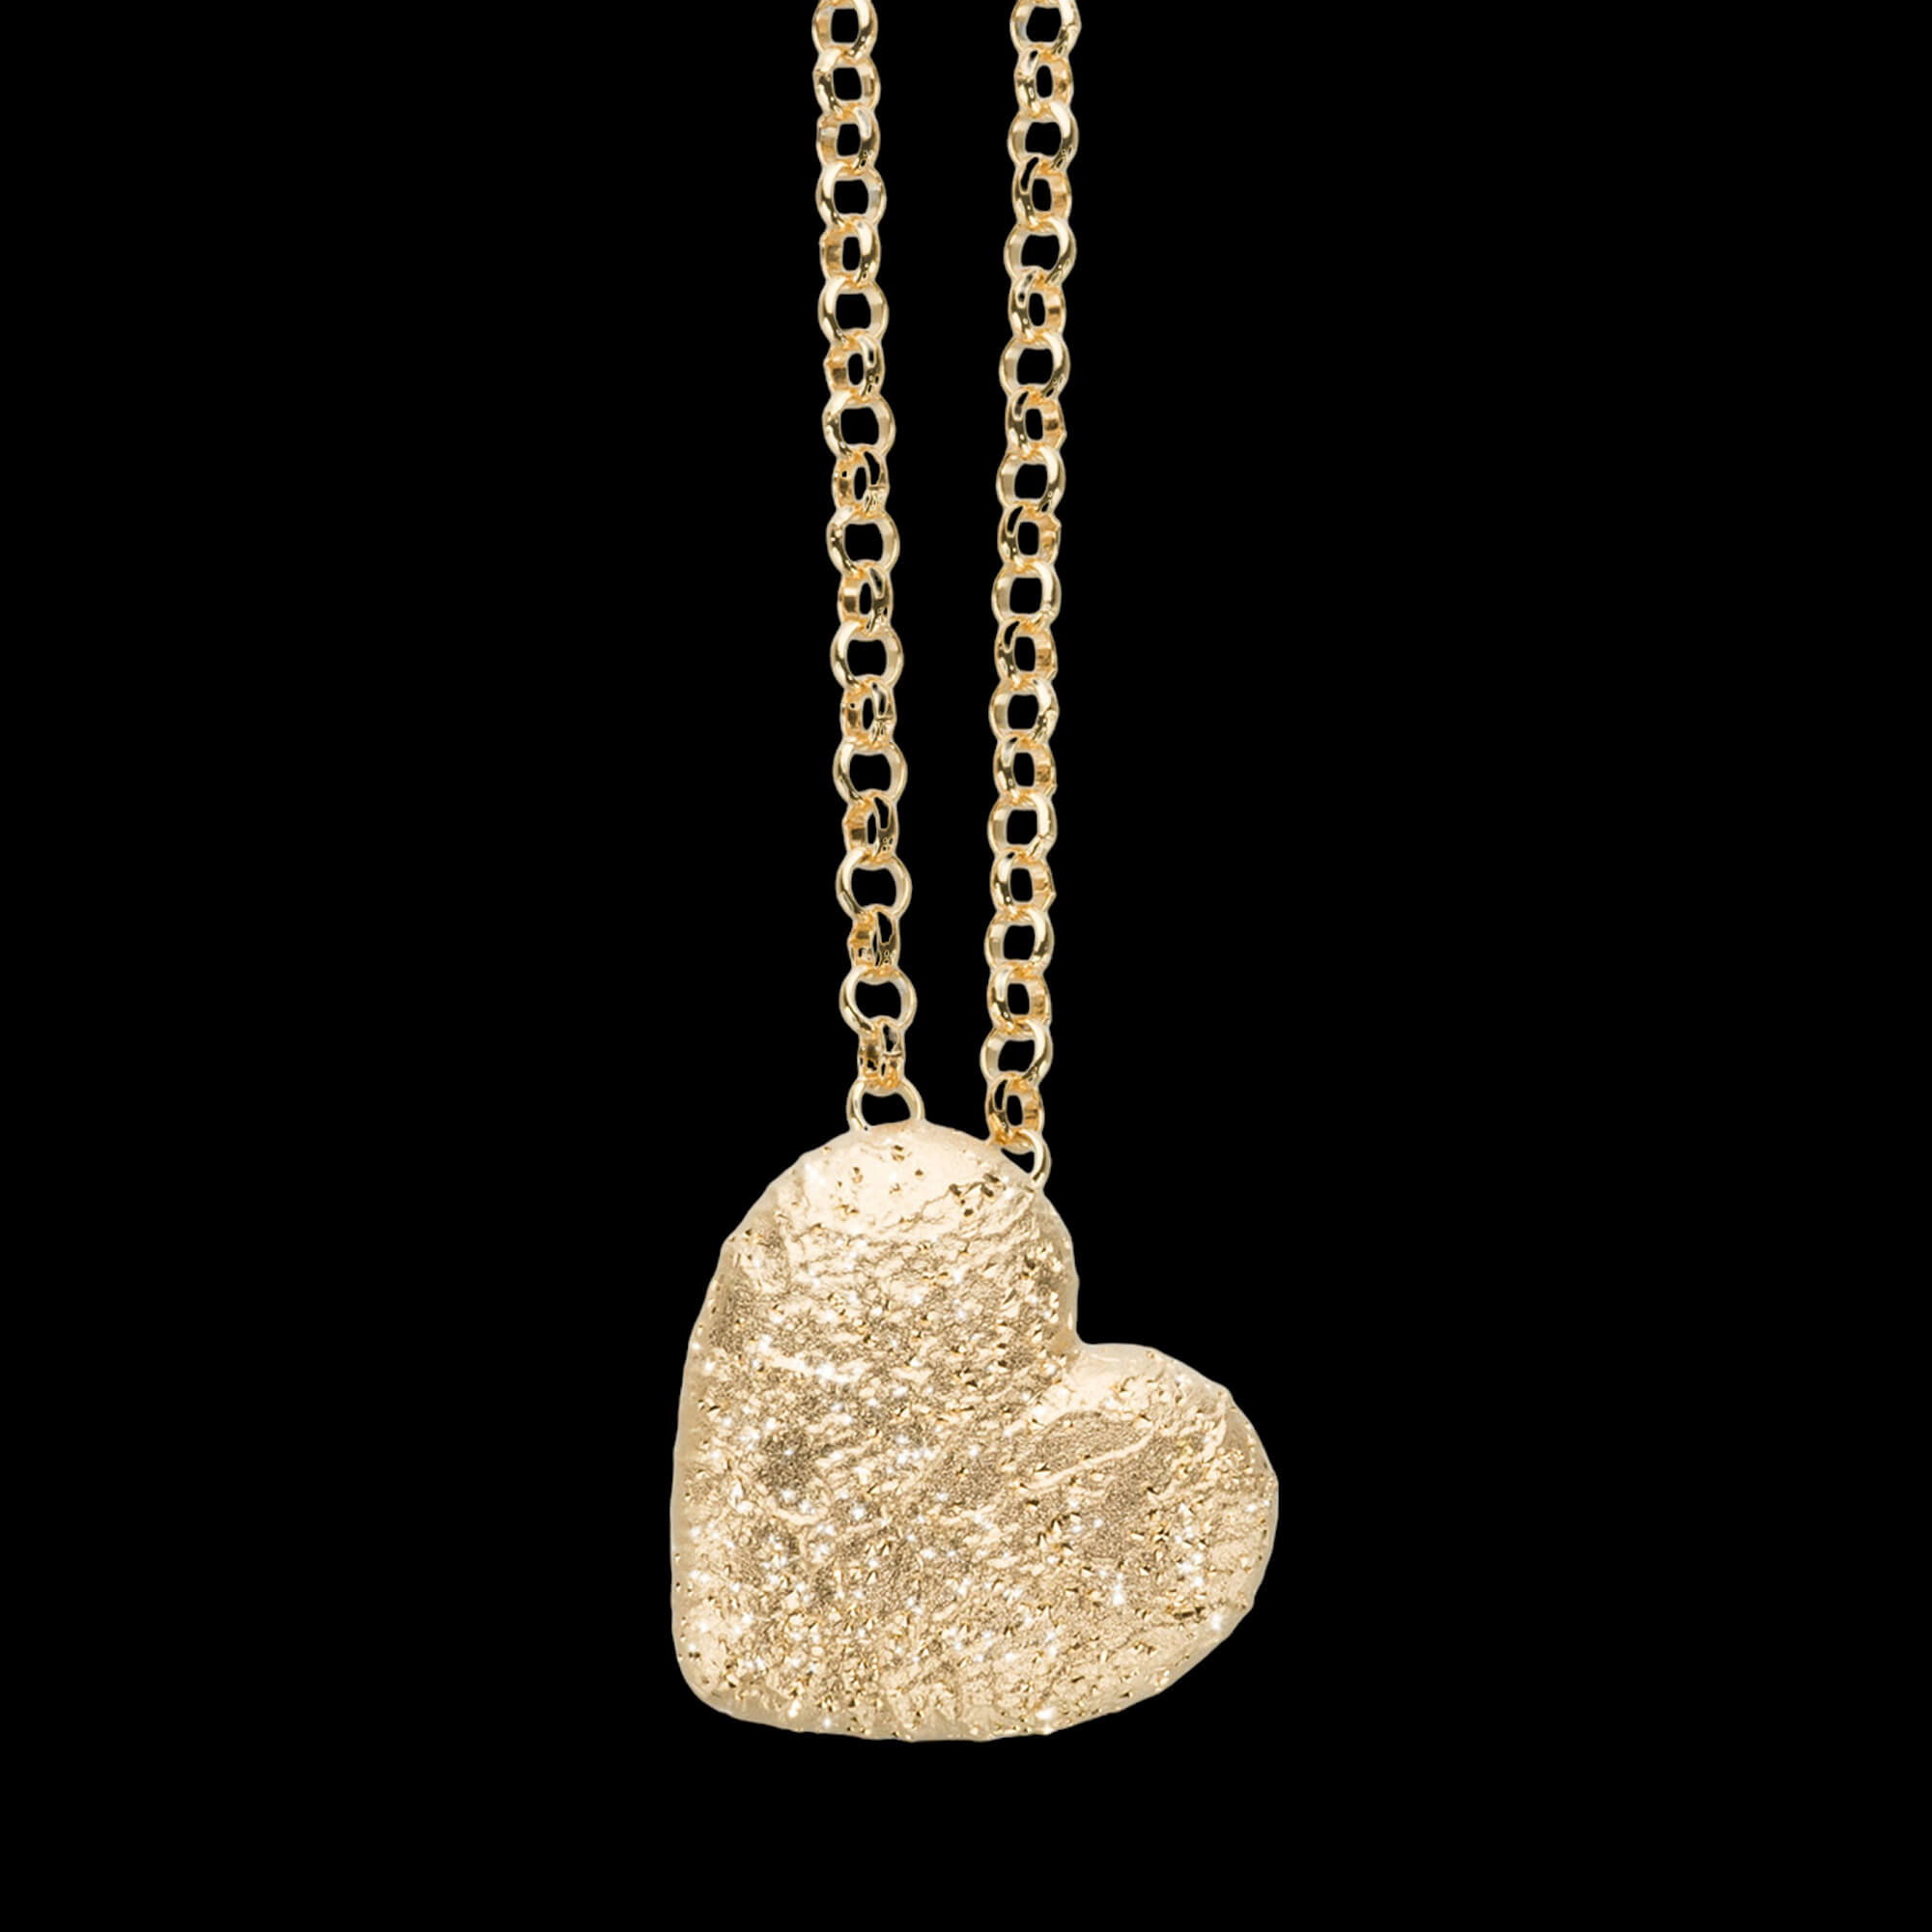 Gilded heart pendant with chain